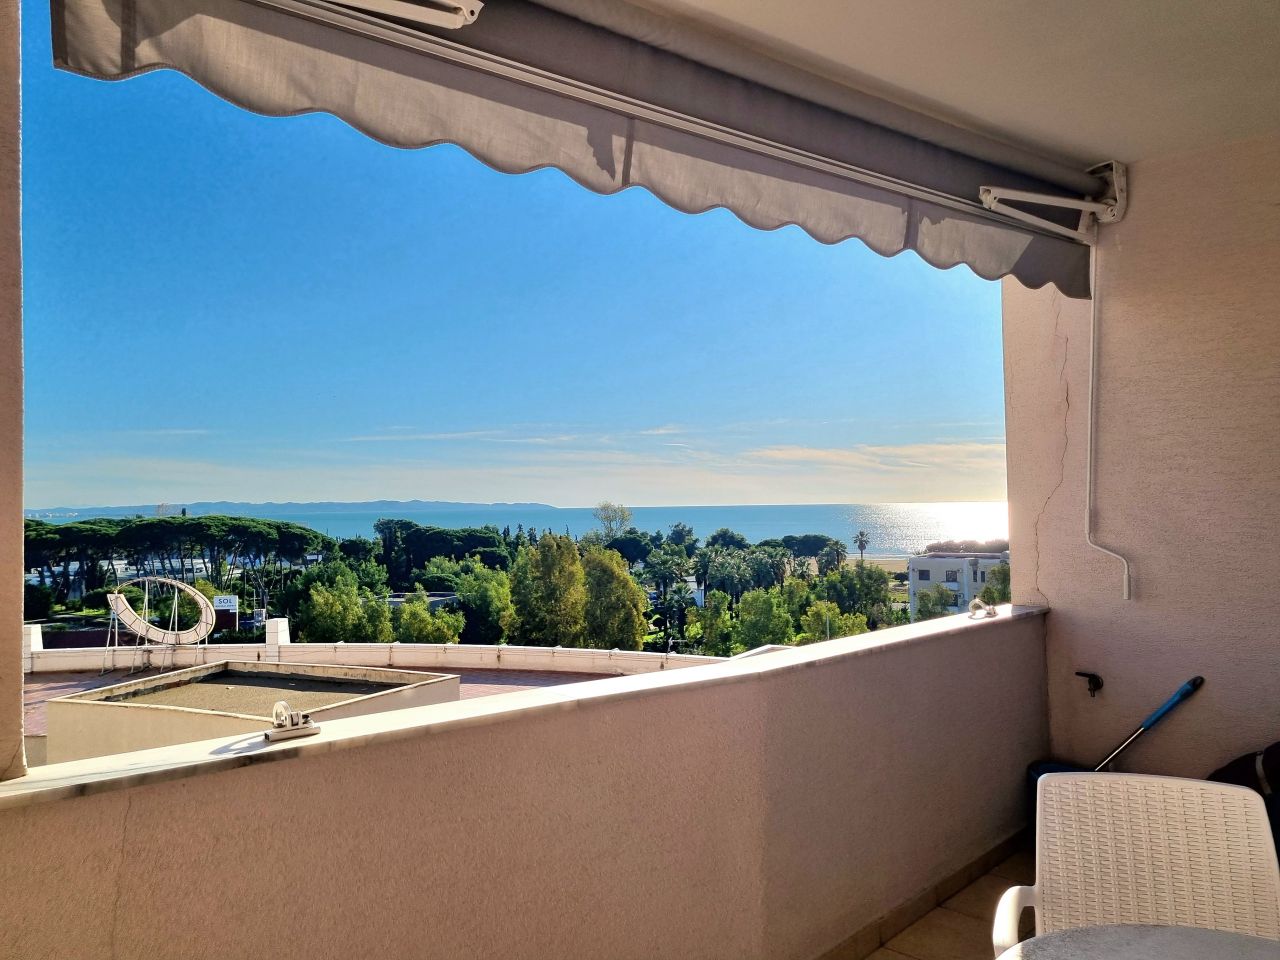 Property In Durres For Sale Albania With Nice Sea View